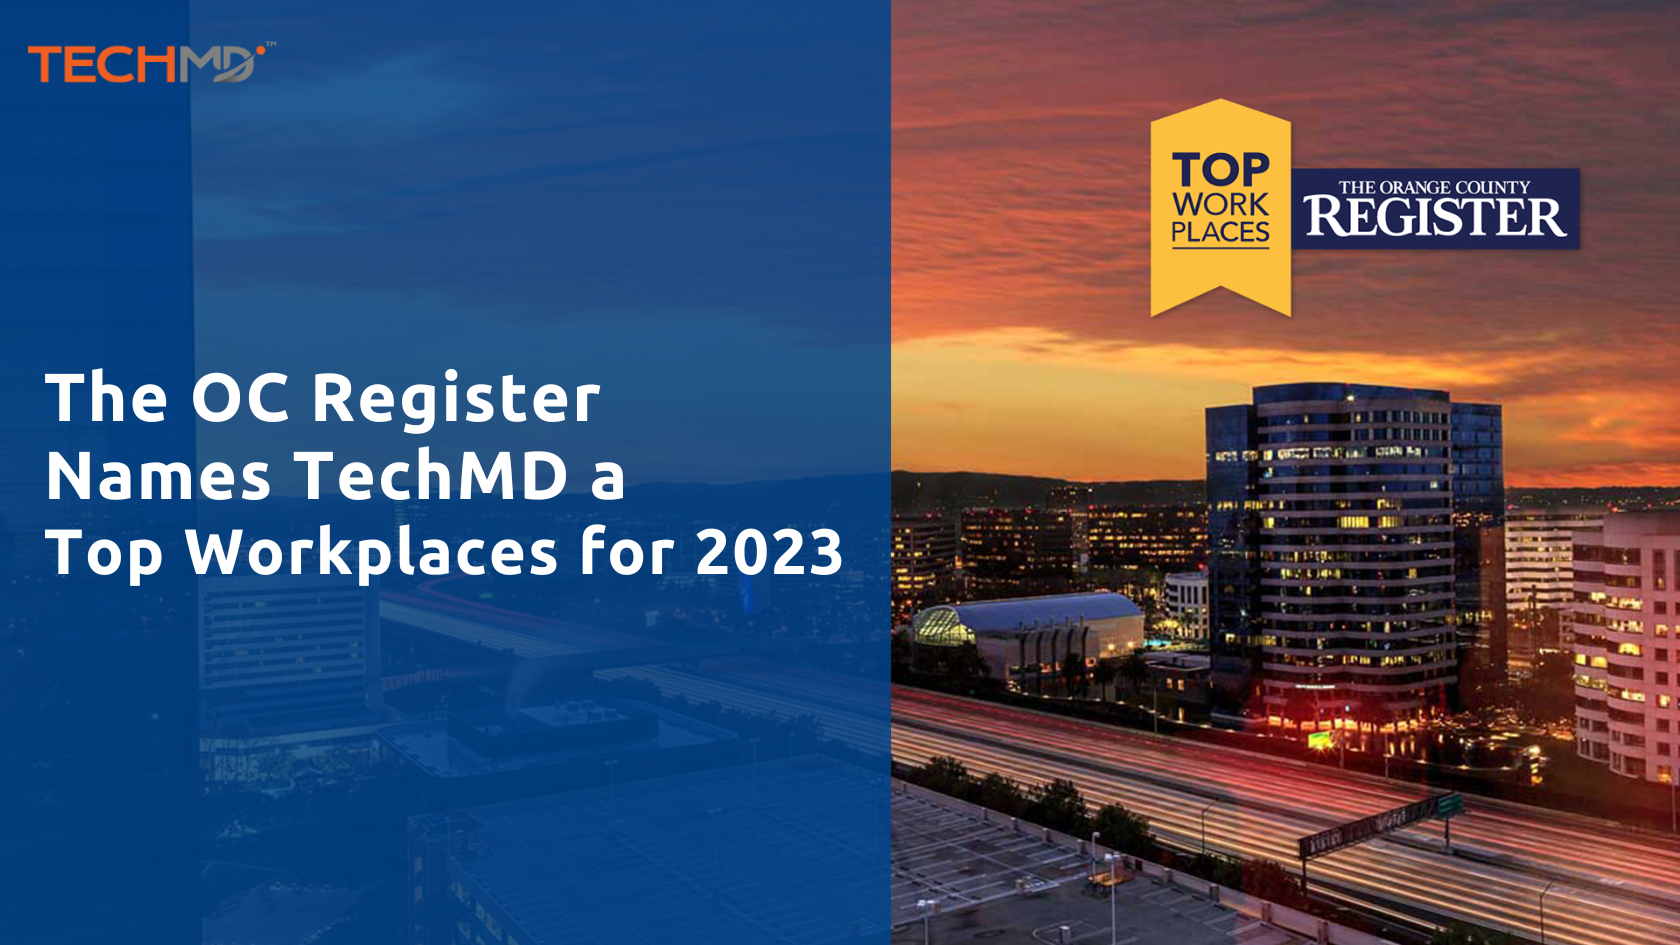 TechMD Top Workplaces 2023